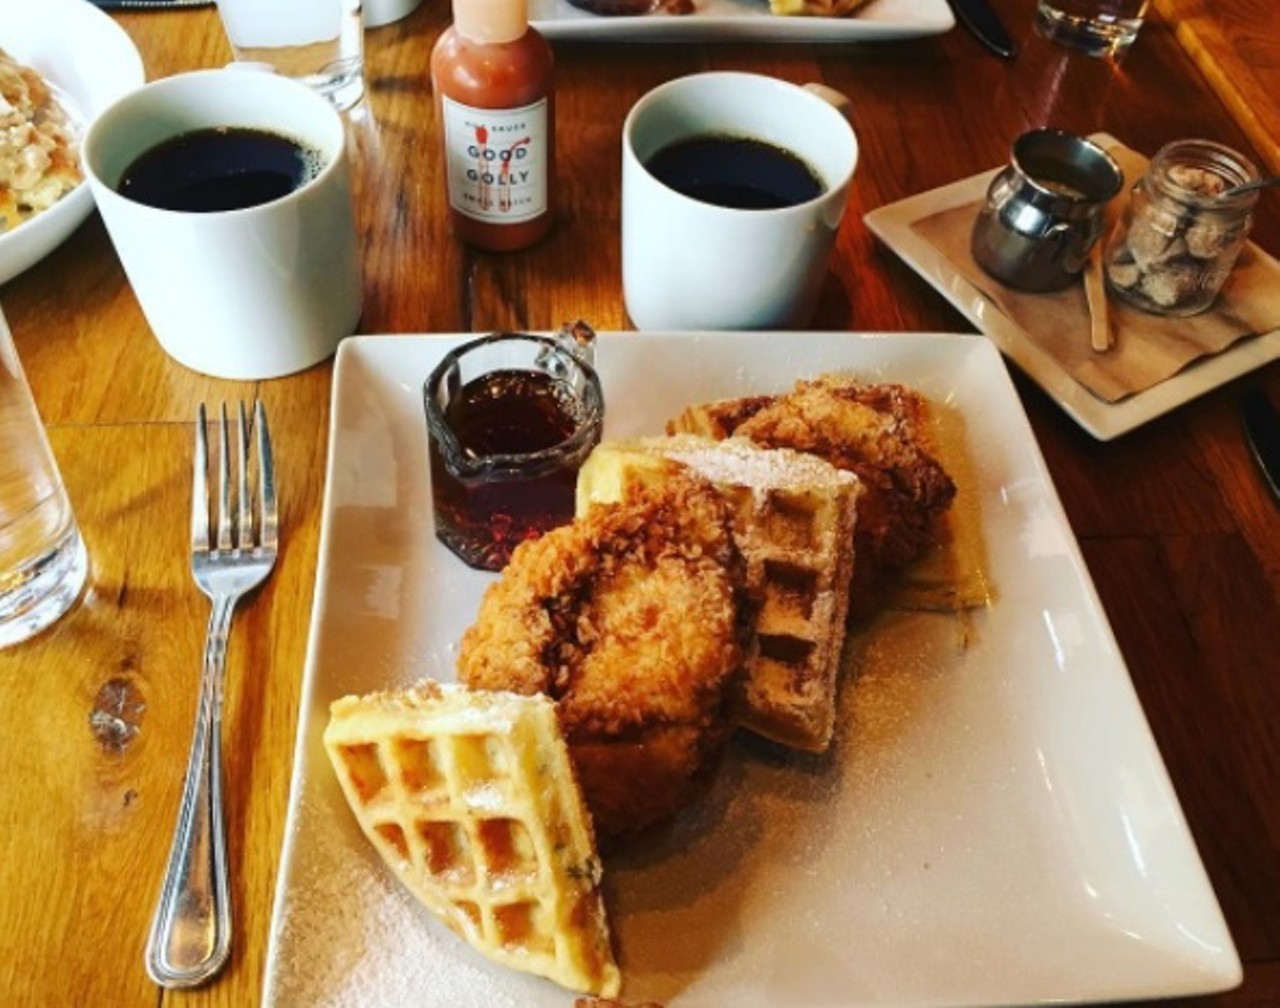 Fried Chicken and Waffles
at Soho Chicken + Whiskey
1889 West 25th St., Cleveland
If you want to eat the best chicken and waffles, you head straight to a Southern restaurant. Since opening, this Ohio City bistro has paired perfect fried chicken with heaven-scented waffles and some of the most addictive housemade hot sauce around to create a winner, winner chicken dinner.
Photo via Scene Archives